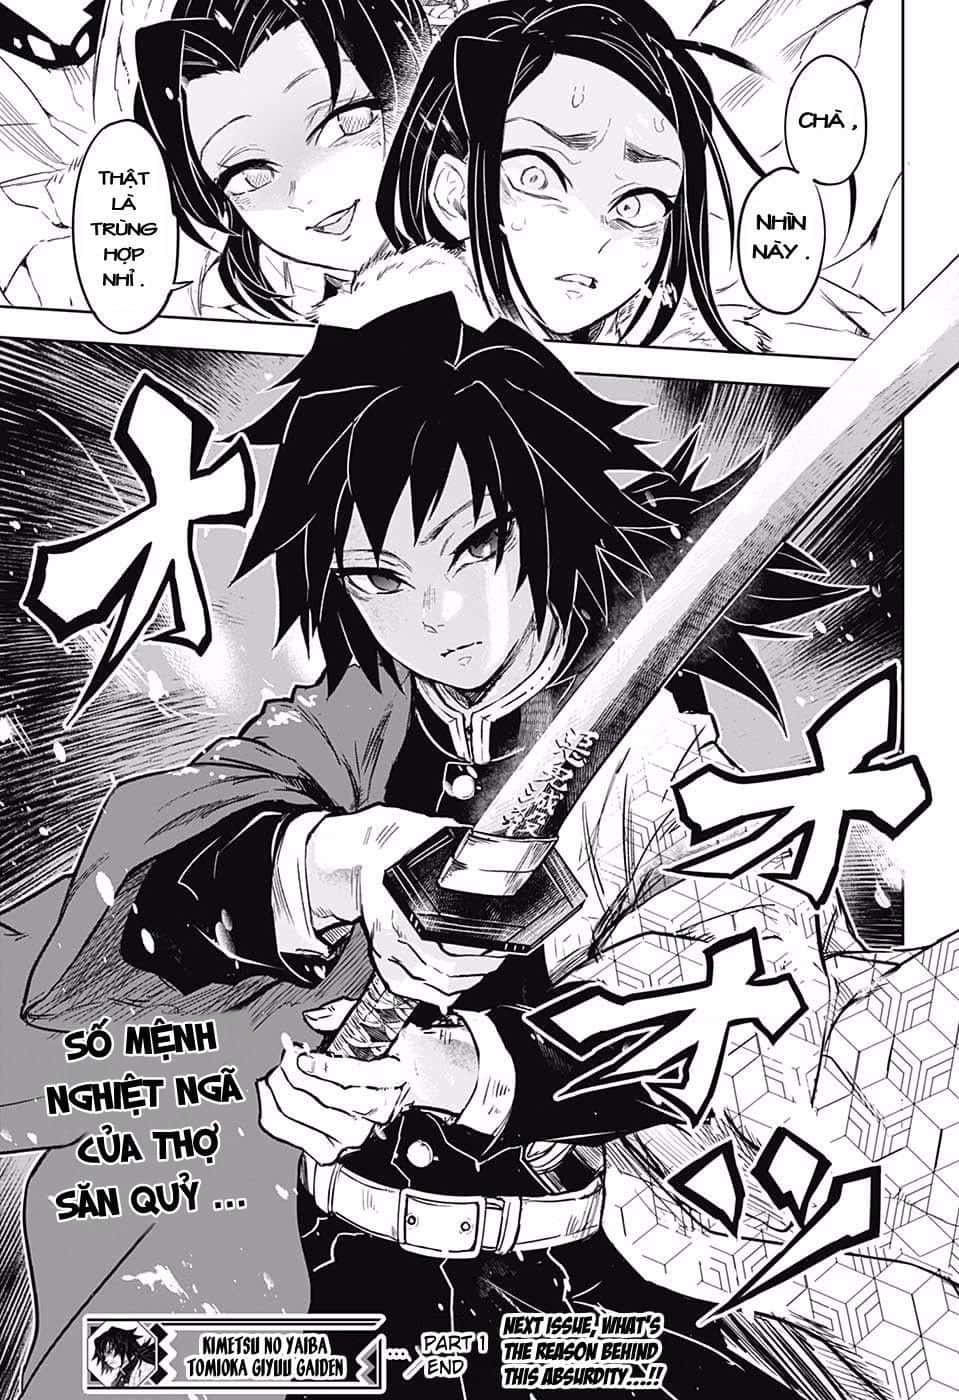 A Manga Page With Two Characters Holding Swords